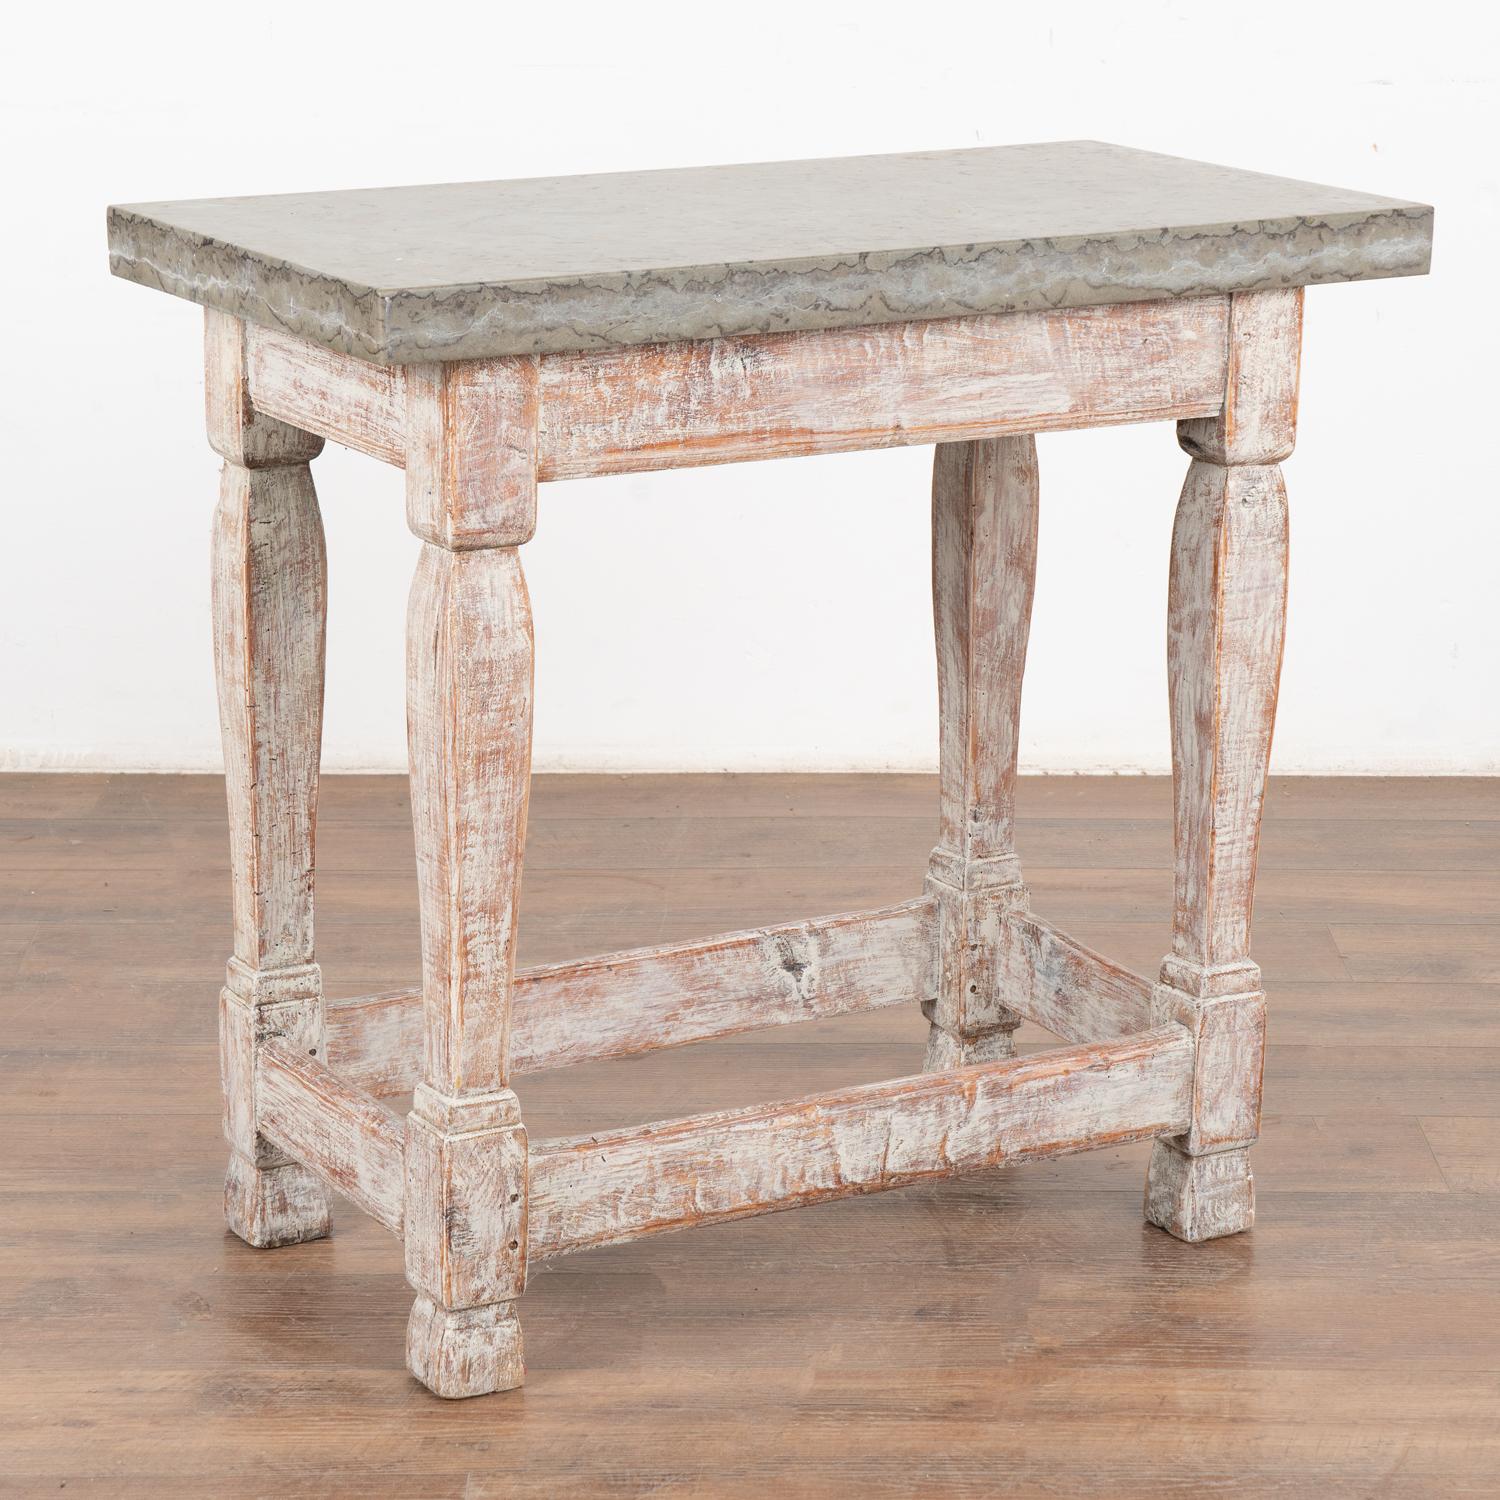 Swedish console table with stunning stone top resting on heavy baroque legs.
Please refer to the close up photos to appreciate the natural beauty of the stone top.
Restored, the strong table base is painted with a newer white finish, distressed